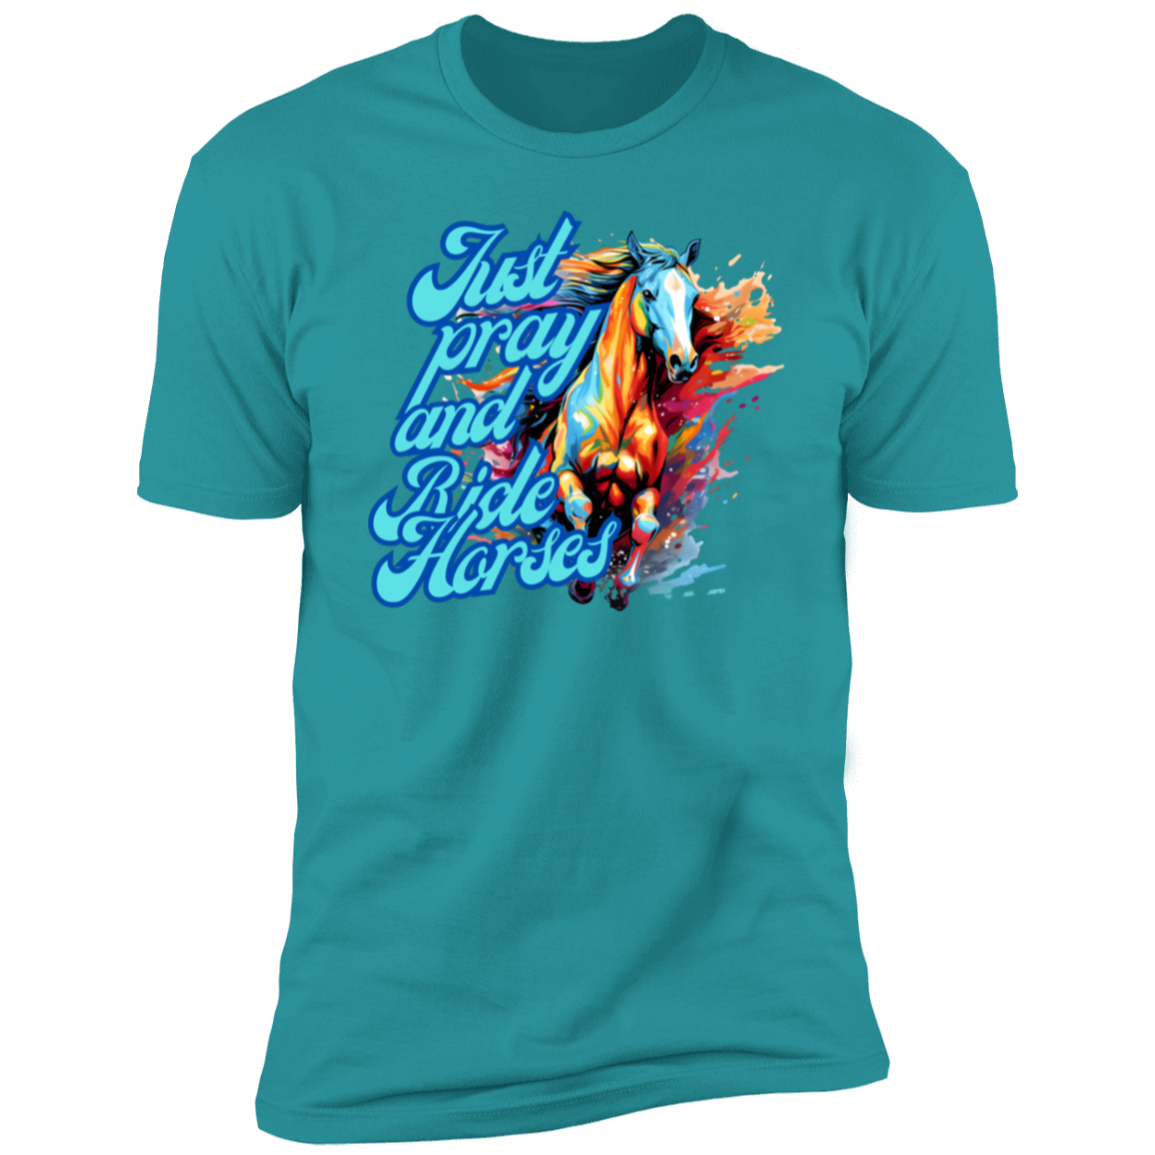 Just Pray and Ride Horses T-Shirt For Horse Lovers